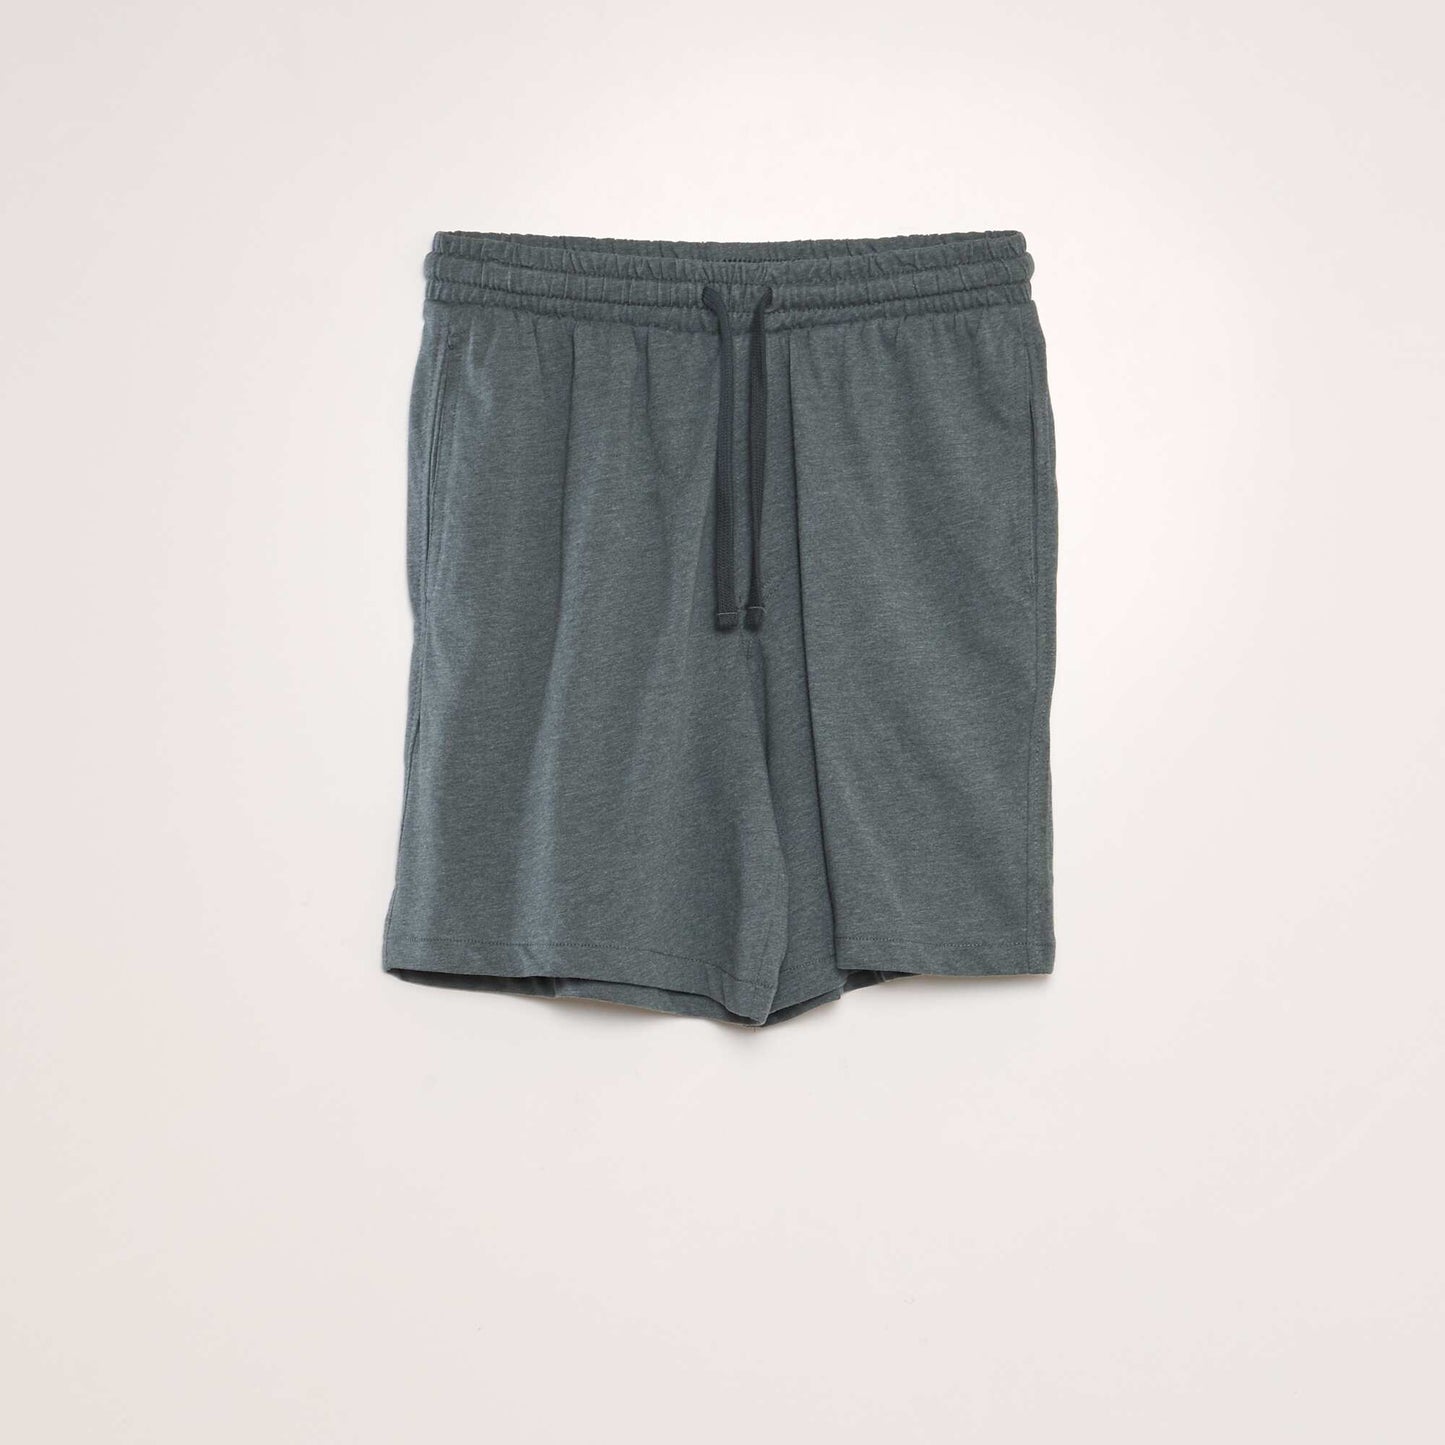 Pack of 2 pairs of jersey shorts GREEN